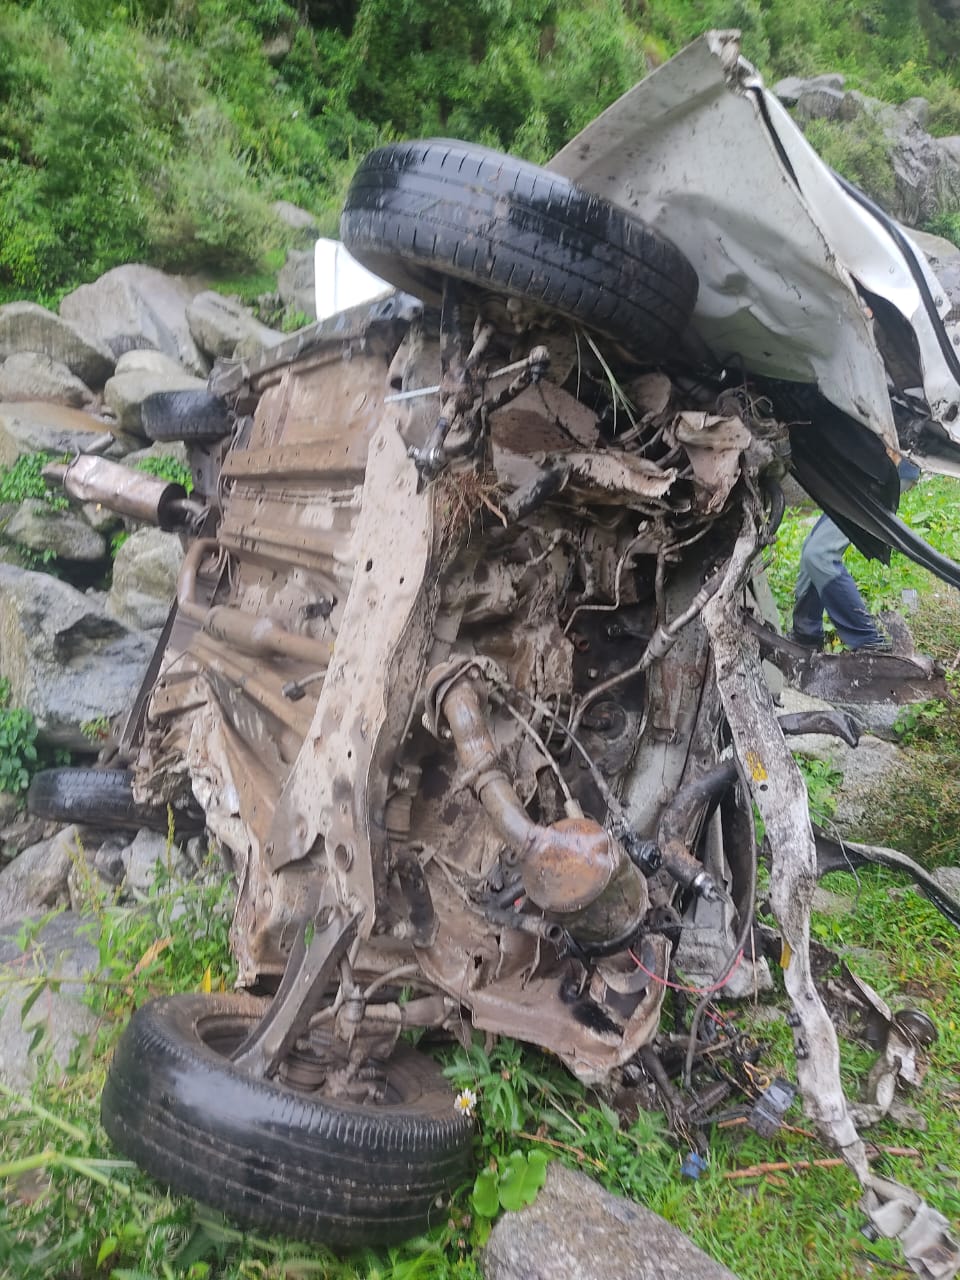 Car fell into ditch on Chamba Jot Road